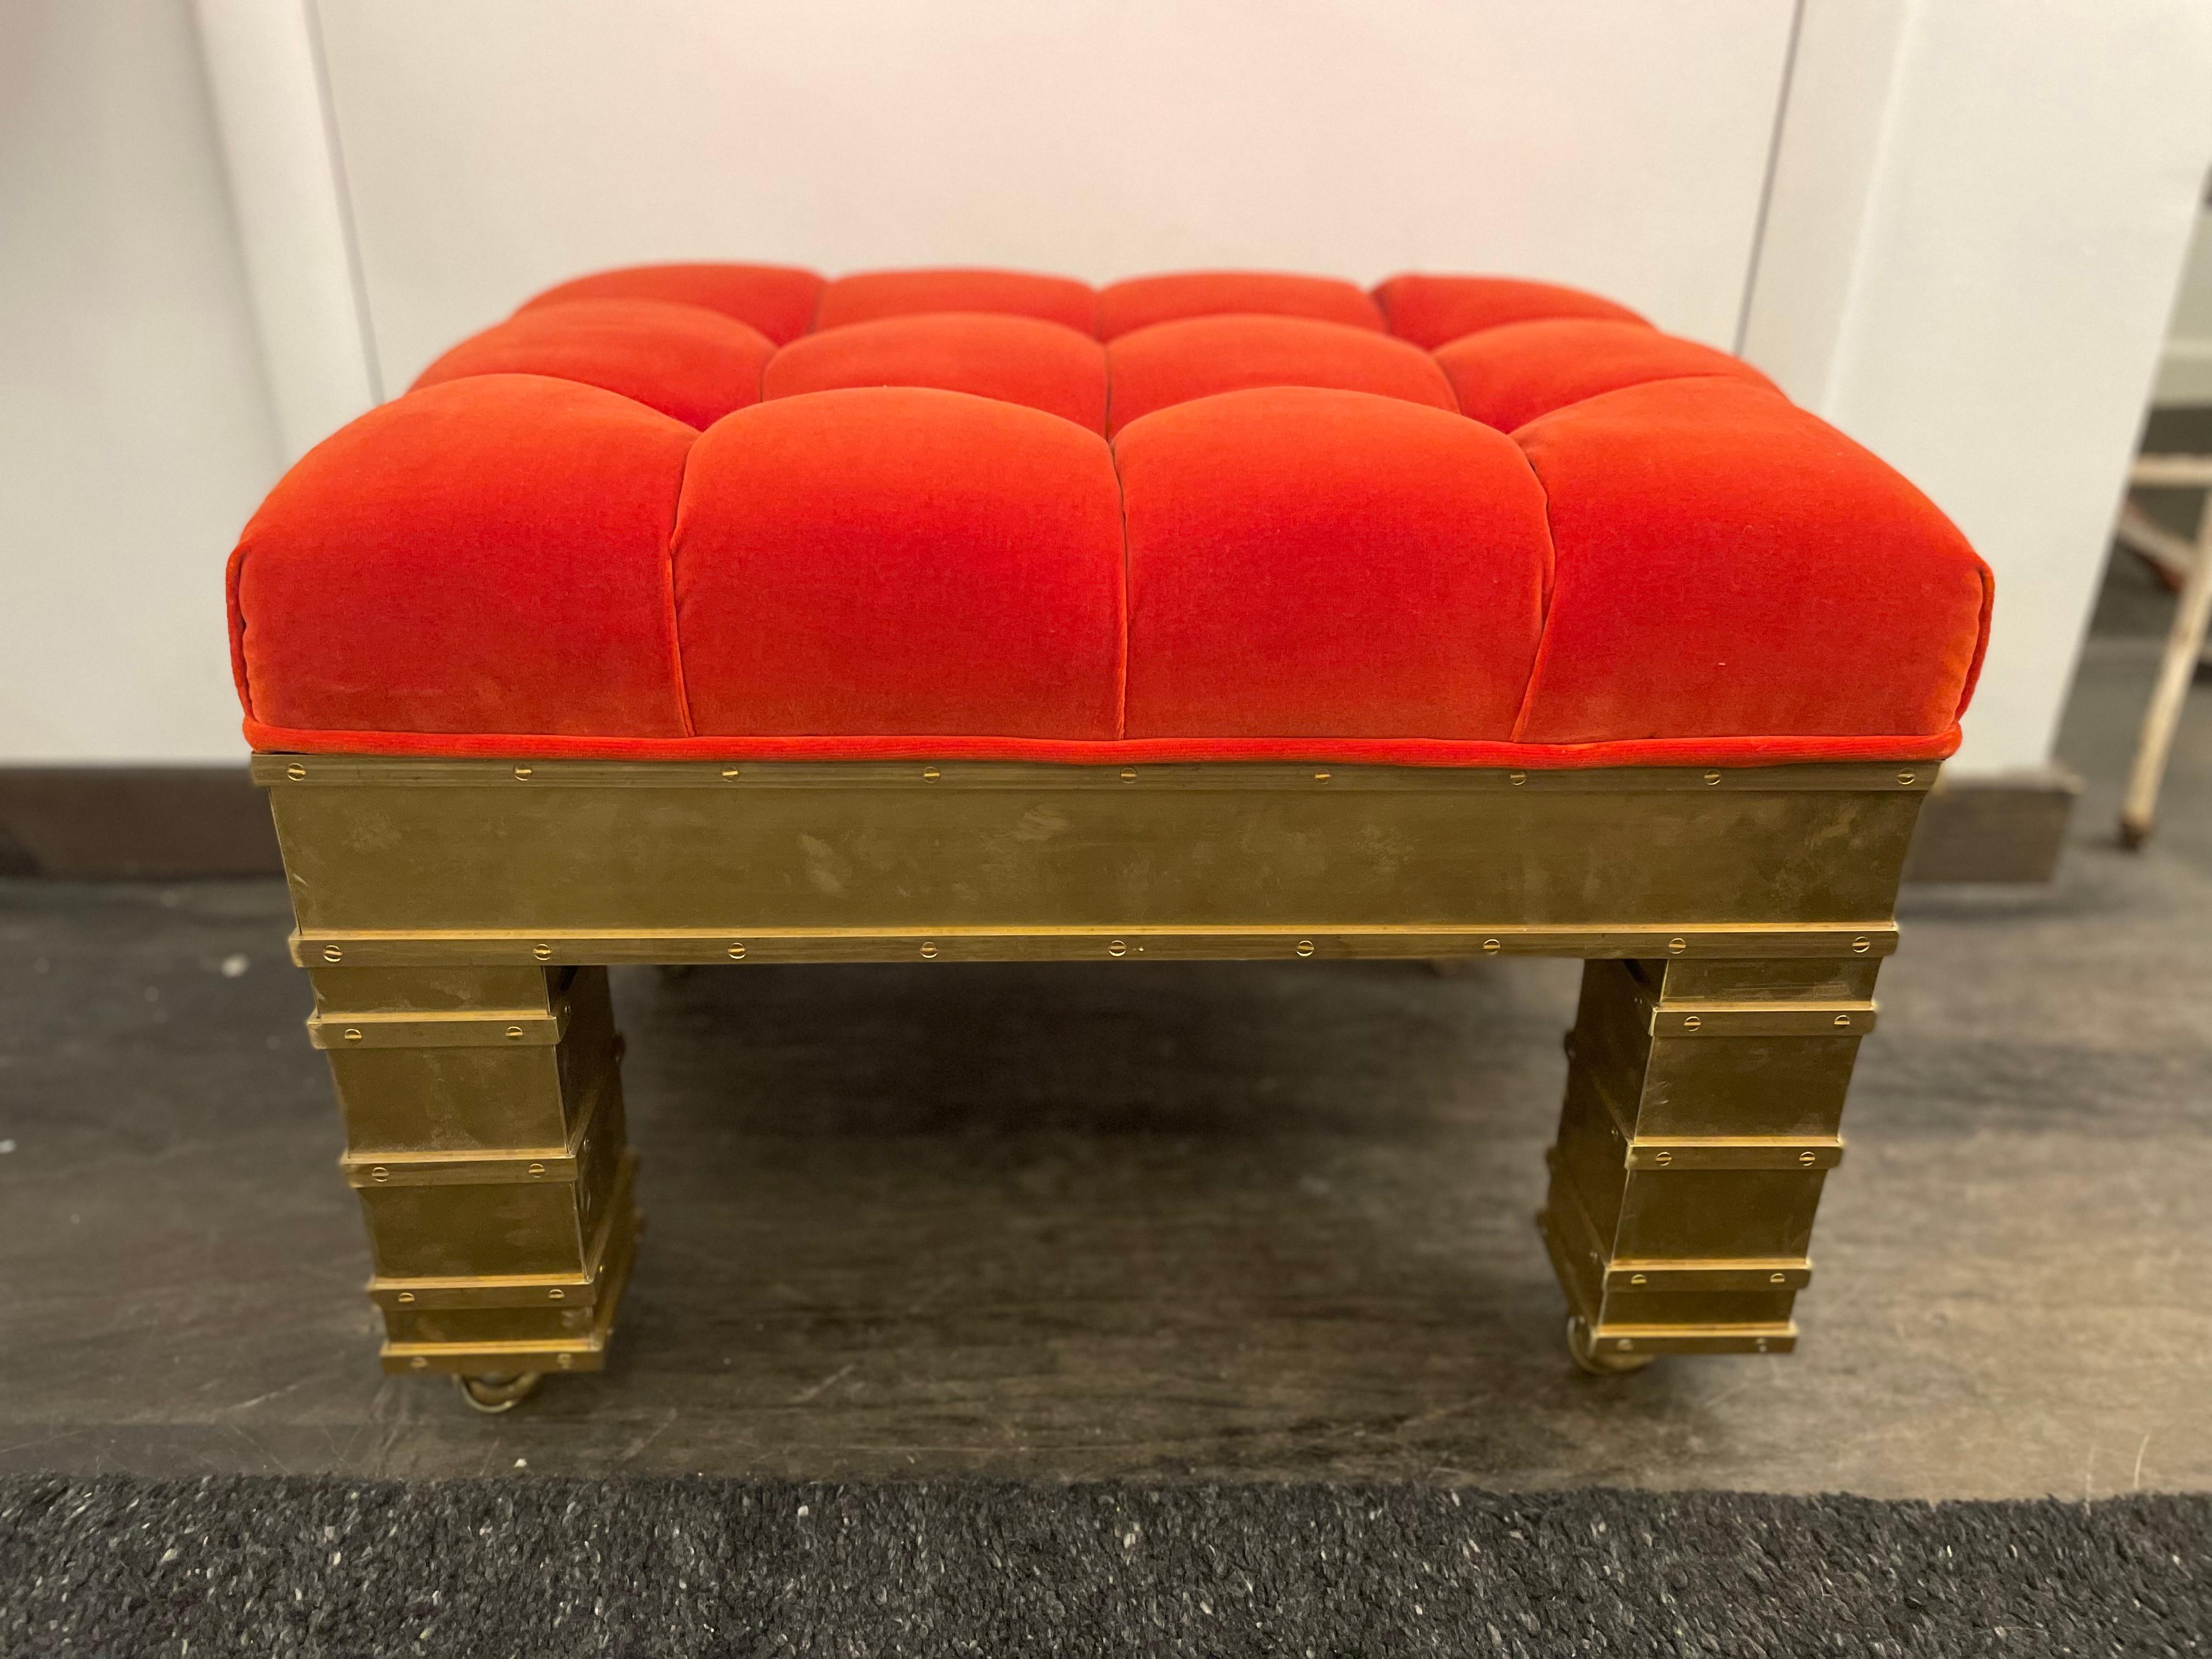 Persimmon colored silk velvet on a fully hand crafted brass clad on wood base + casters for easy movement. The European screws throughout this amazing bench/ ottoman is eye-catching. NOTE: upholstery of one bench is slightly taller than the other,